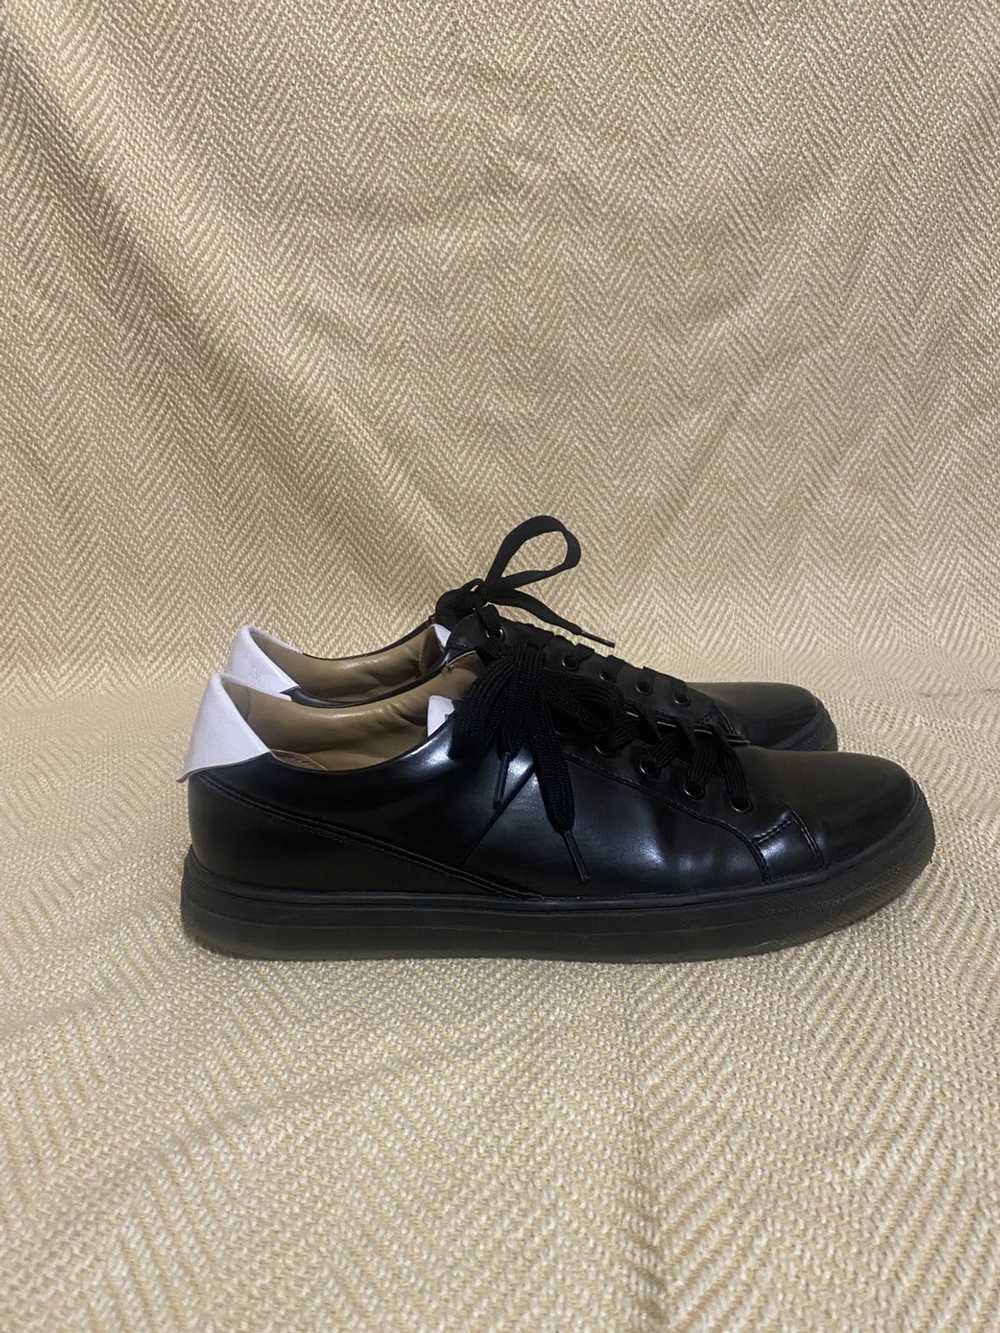 Kenneth Cole Kenneth Cole black leather sneakers - image 2